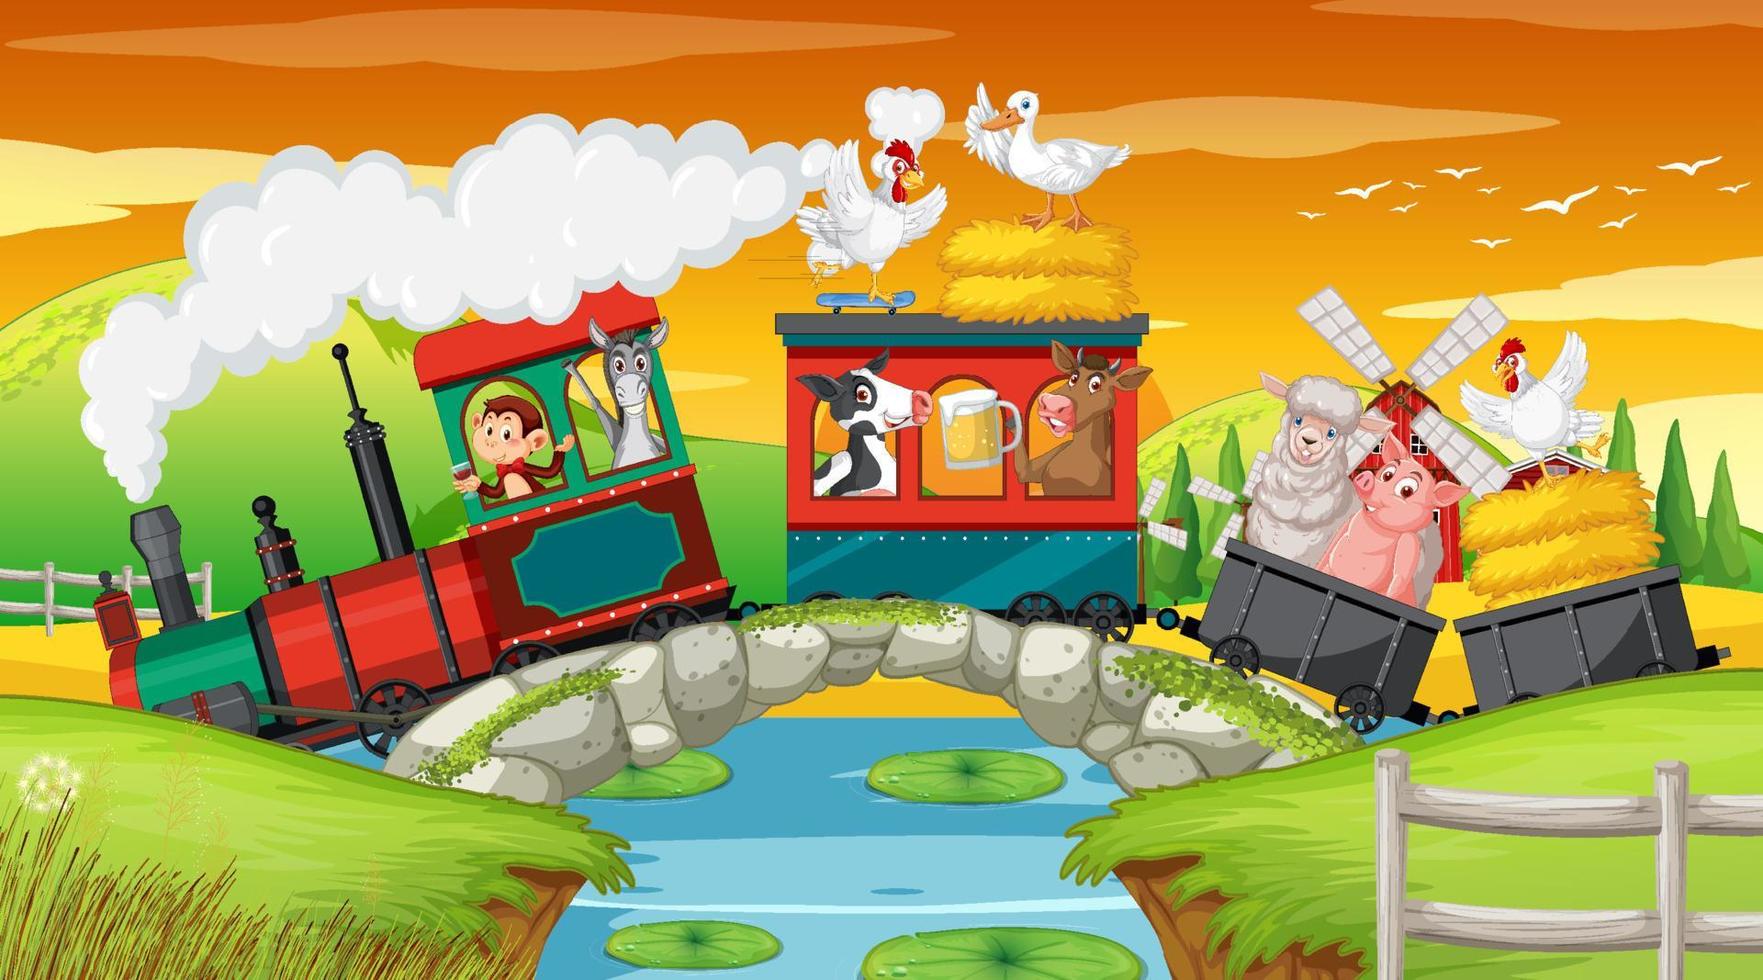 Many animals riding on train in countryside vector